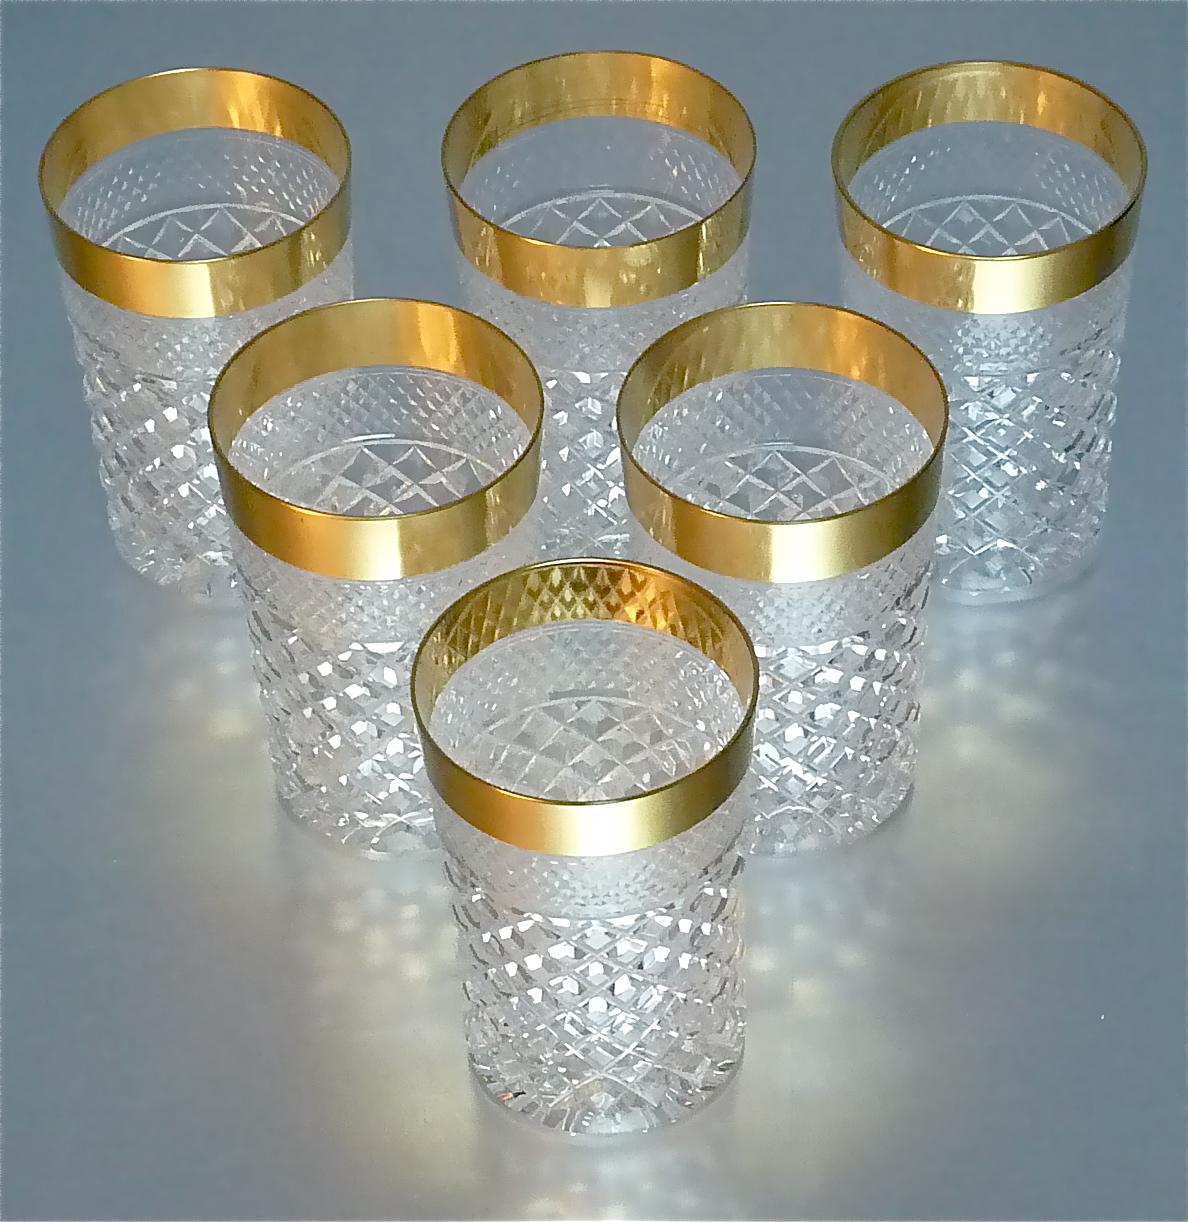 Precious 6 Water Glasses Gold Crystal Glass Tumbler Josephinenhuette Moser For Sale 7